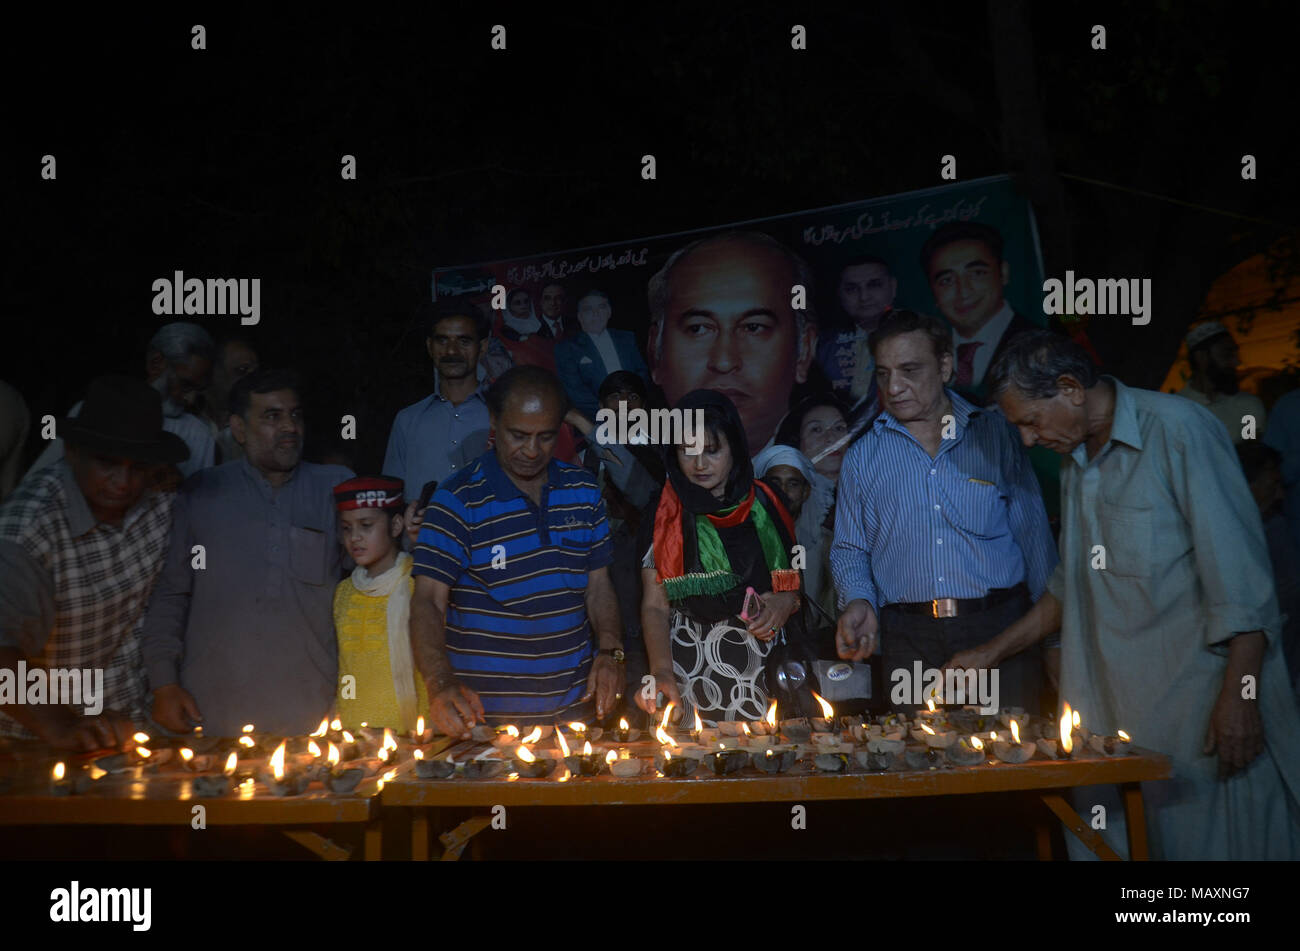 Pakistani workers of Peoples' Party (PPP) are offering dua for Shaheed Zulfiqar Ali Bhutto on the occasion of his martyrdom 39th death anniversary at Chairing Cross. in Lahore on April 03, 2018. Zulfikar Ali Bhutto I (5 January 1928 - 4 April 1979) was a Pakistani politician who served as Prime Minister of Pakistan from 1973 to 1977, and prior to that as the fourth President of Pakistan from 1971 to 1973. He is revered by his followers in Pakistan as Quaid-i-Awam He was also the founder of the Pakistan People's Party (PPP) and served as its chairman until his execution in 1979. (Photo by Rana Stock Photo